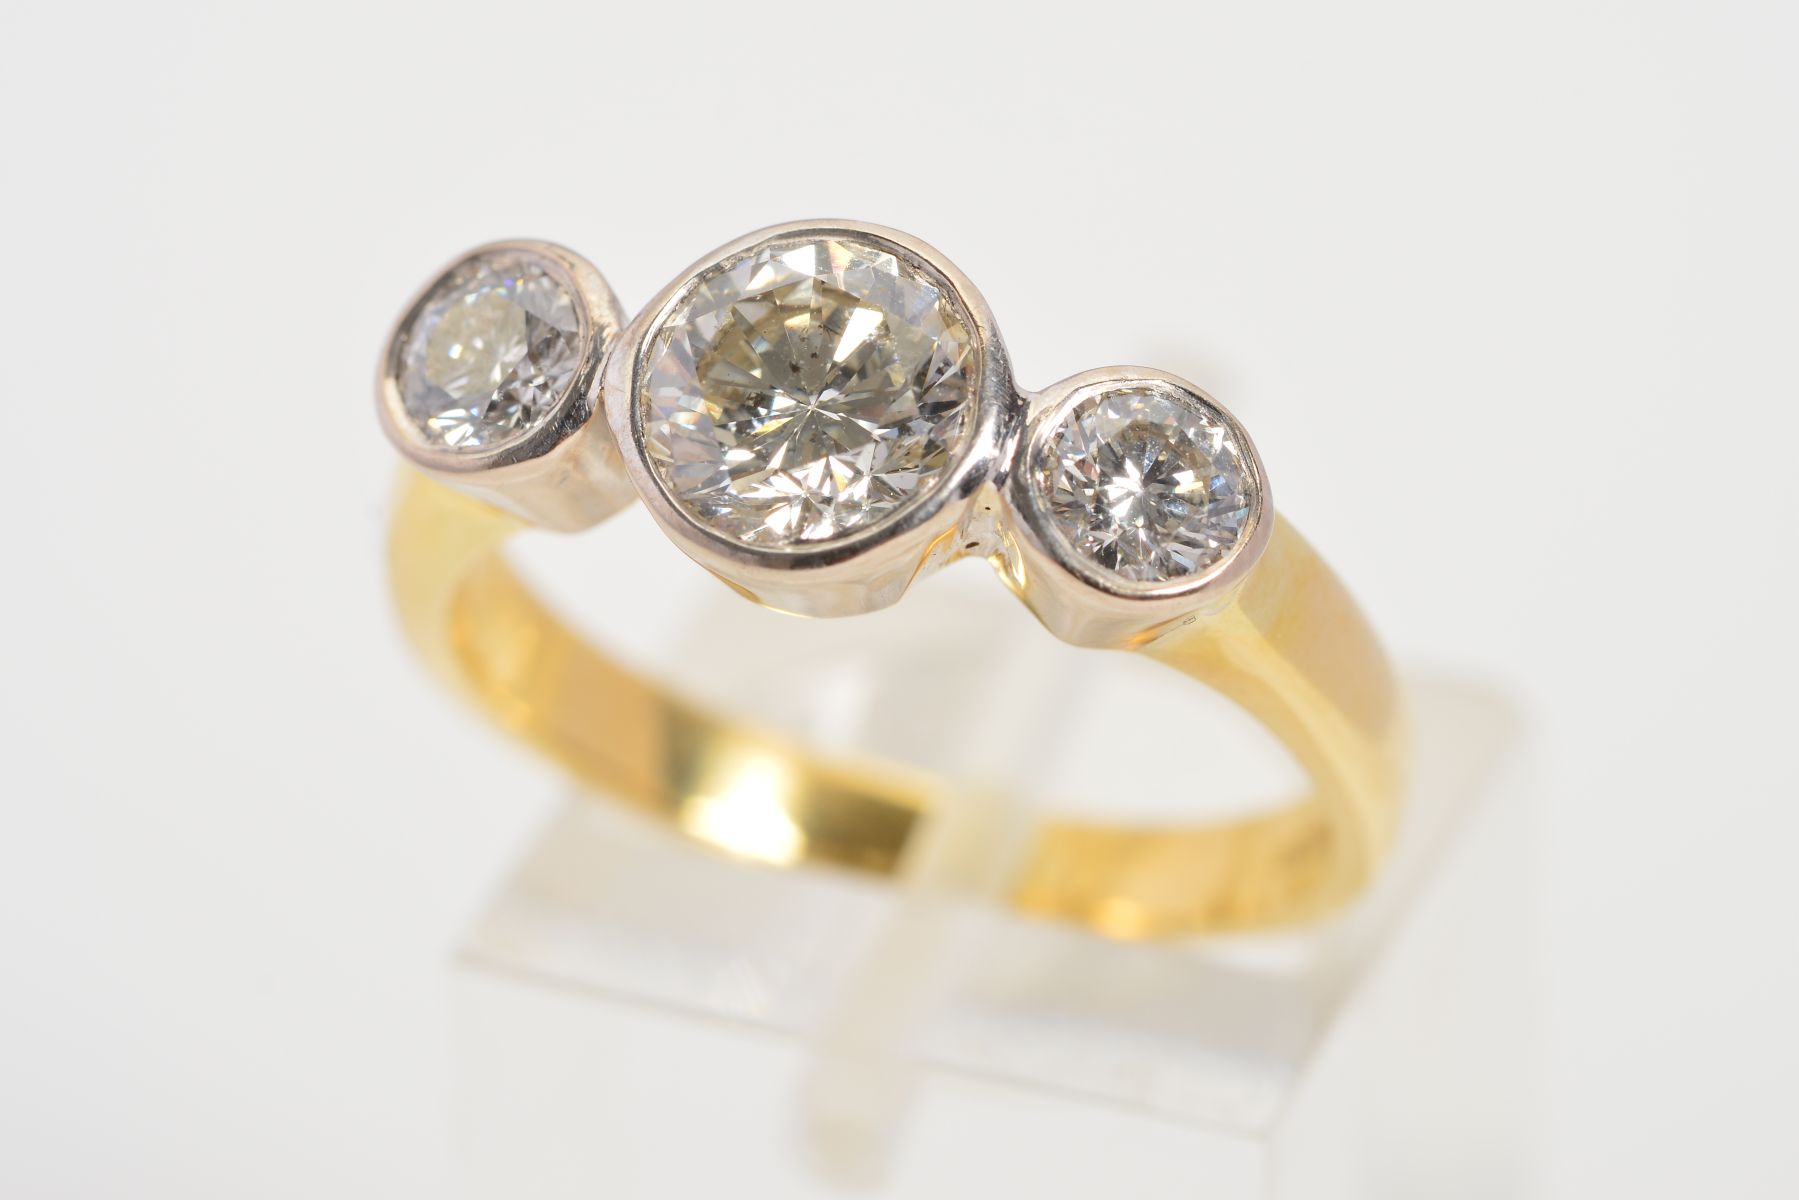 AN 18CT GOLD THREE STONE DIAMOND RING, designed as three brilliant cut diamonds within collet - Image 3 of 6